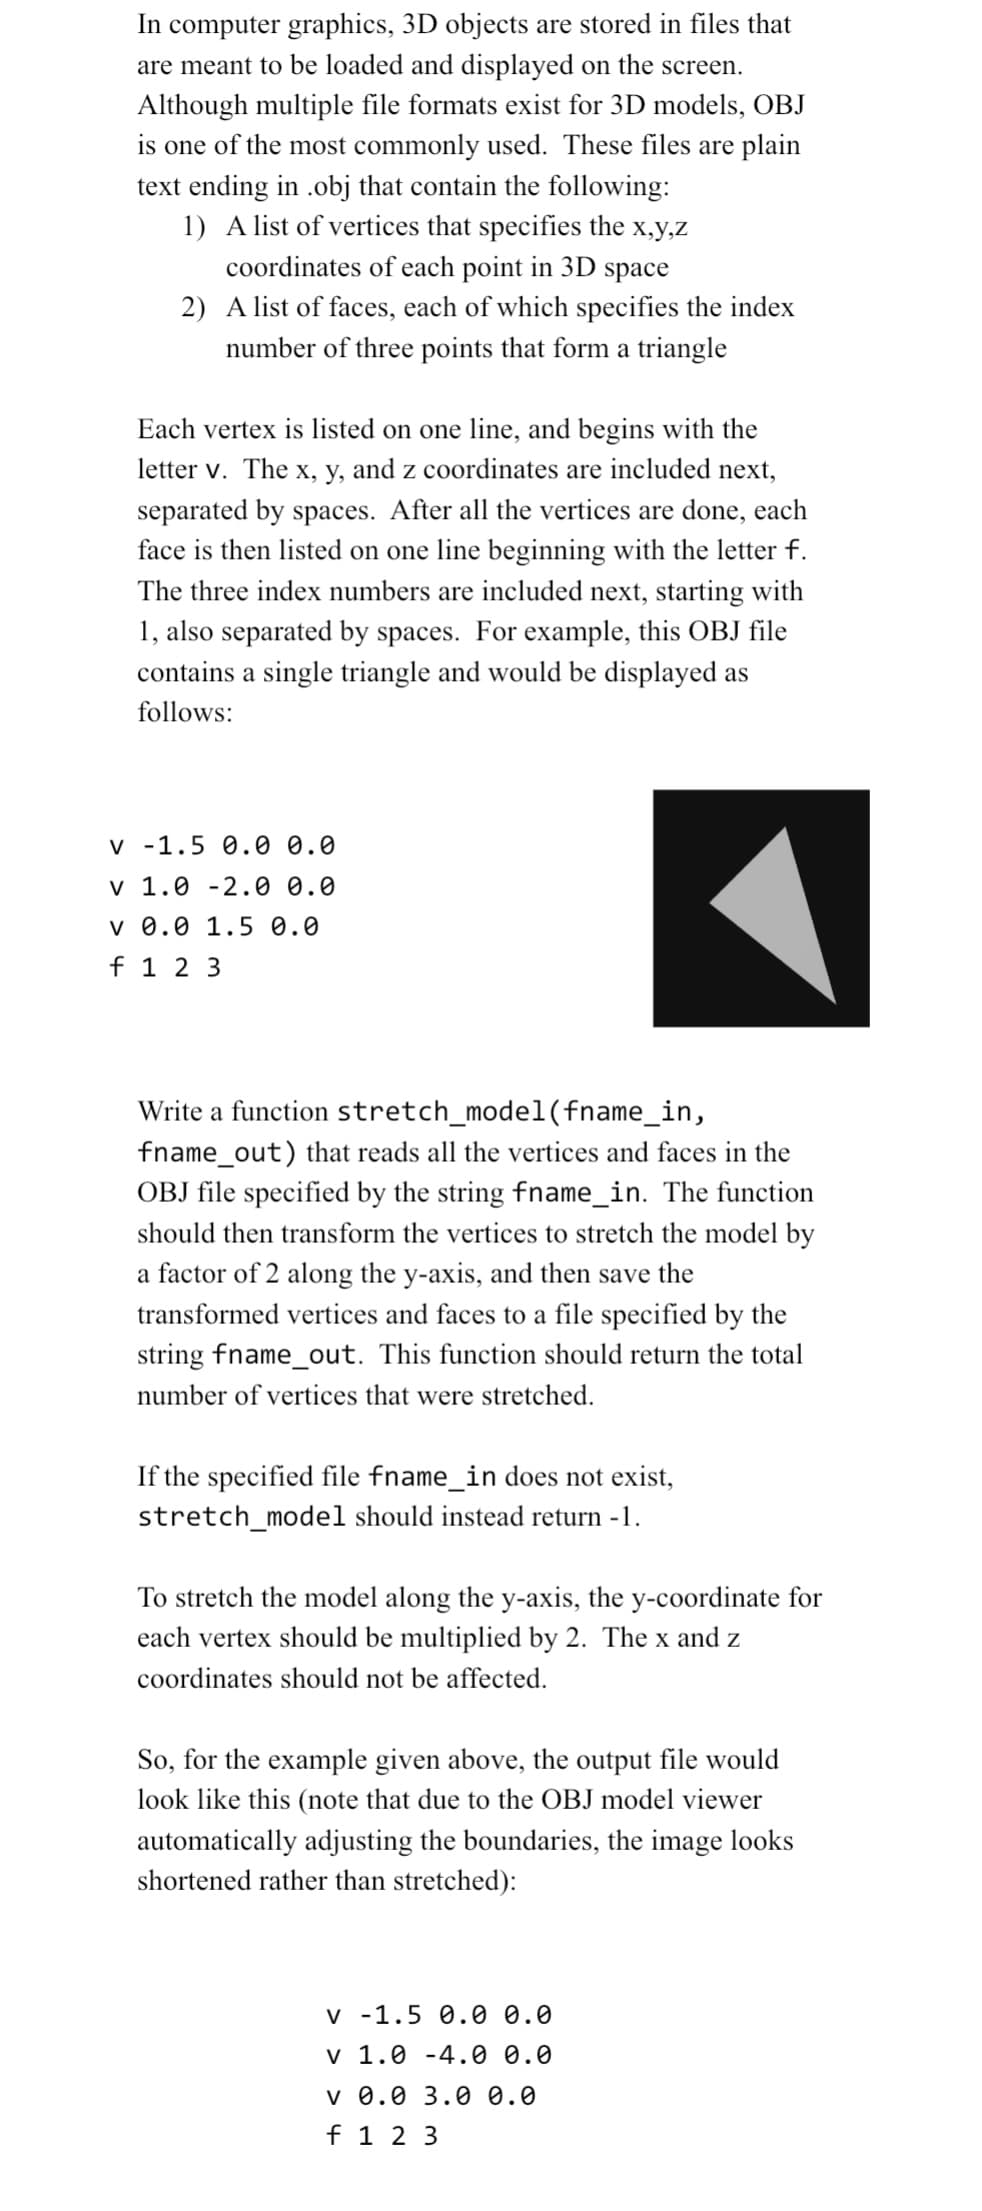 In computer graphics, 3D objects are stored in files that
are meant to be loaded and displayed on the screen.
Although multiple file formats exist for 3D models, OBJ
is one of the most commonly used. These files are plain
text ending in .obj that contain the following:
1) A list of vertices that specifies the x,y,z
coordinates of each point in 3D space
2) A list of faces, each of which specifies the index
number of three points that form a triangle
Each vertex is listed on one line, and begins with the
letter v. The x, y, and z coordinates are included next,
separated by spaces. After all the vertices are done, each
face is then listed on one line beginning with the letter f.
The three index numbers are included next, starting with
1, also separated by spaces. For example, this OBJ file
contains a single triangle and would be displayed as
follows:
v -1.5 0.0 0.0
v 1.0 -2.0 0.0
v 0.0 1.5 0.0
f 1 2 3
Write a function stretch_model(fname_in,
fname_out) that reads all the vertices and faces in the
OBJ file specified by the string fname_in. The function
should then transform the vertices to stretch the model by
a factor of 2 along the y-axis, and then save the
transformed vertices and faces to a file specified by the
string fname_out. This function should return the total
number of vertices that were stretched.
If the specified file fname_in does not exist,
stretch_model should instead return -1.
To stretch the model along the y-axis, the y-coordinate for
each vertex should be multiplied by 2. The x and z
coordinates should not be affected.
So, for the example given above, the output file would
look like this (note that due to the OBJ model viewer
automatically adjusting the boundaries, the image looks
shortened rather than stretched):
v -1.5 0.0 0.0
v 1.0 -4.0 0.0
v 0.0 3.0 0.0
f 1 2 3